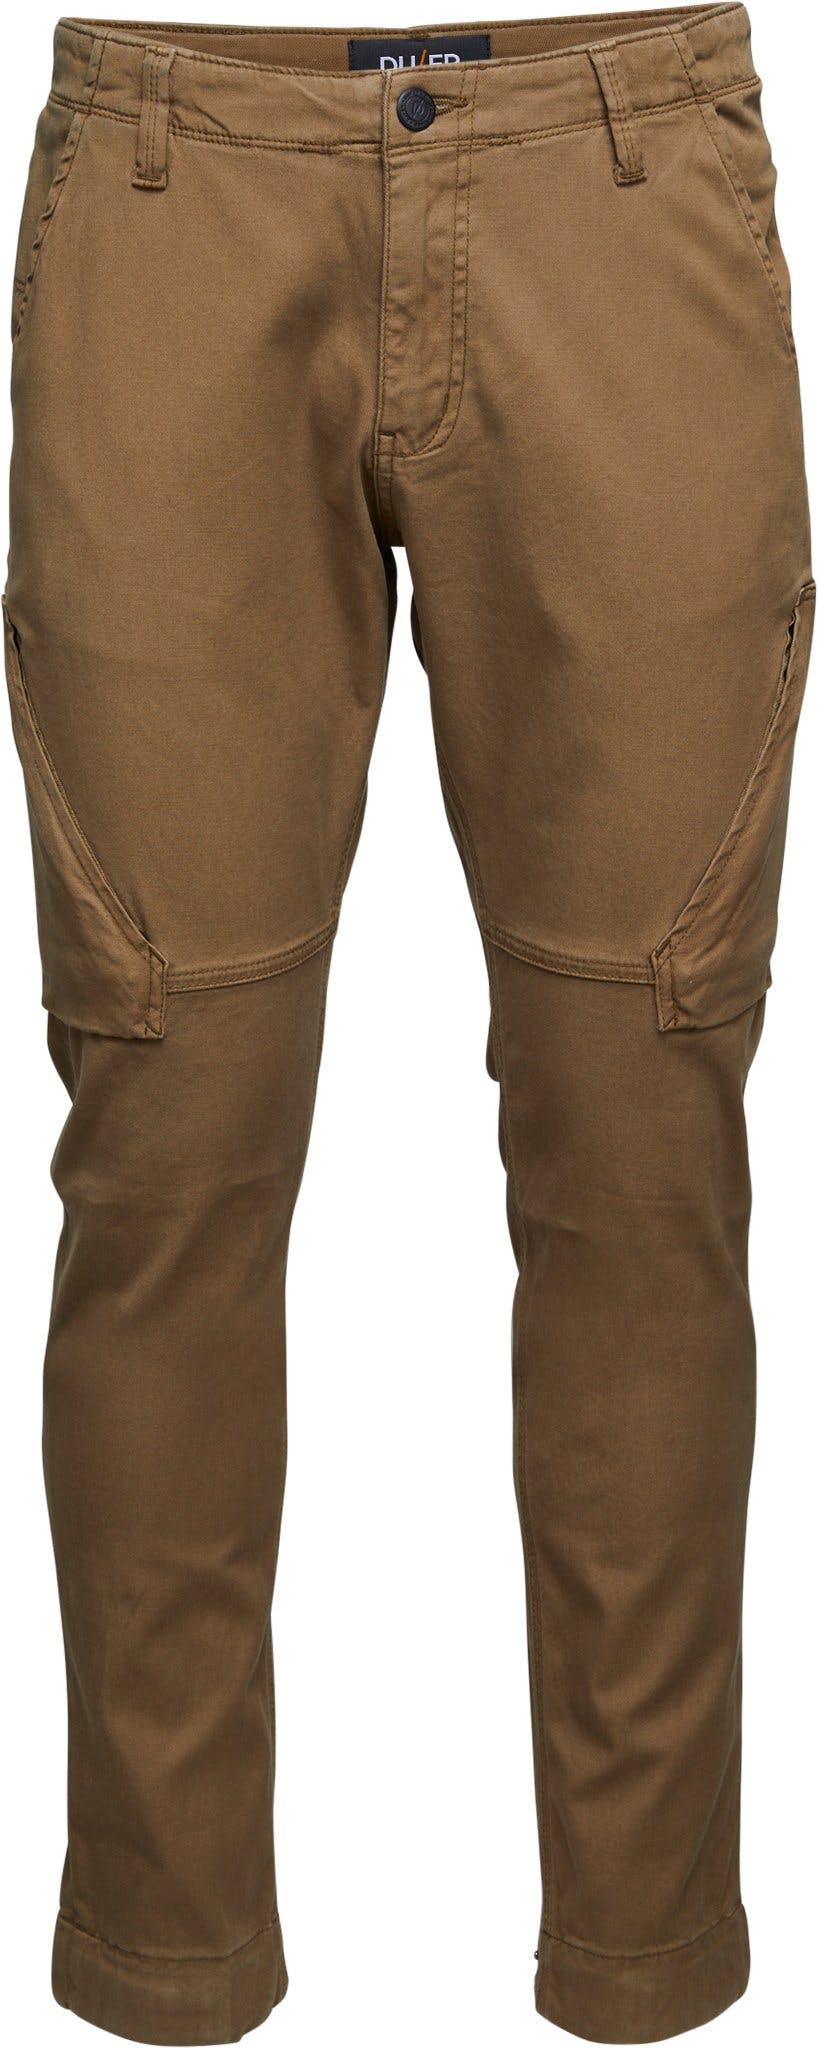 Product image for Live Free Adventure Pant - Men's